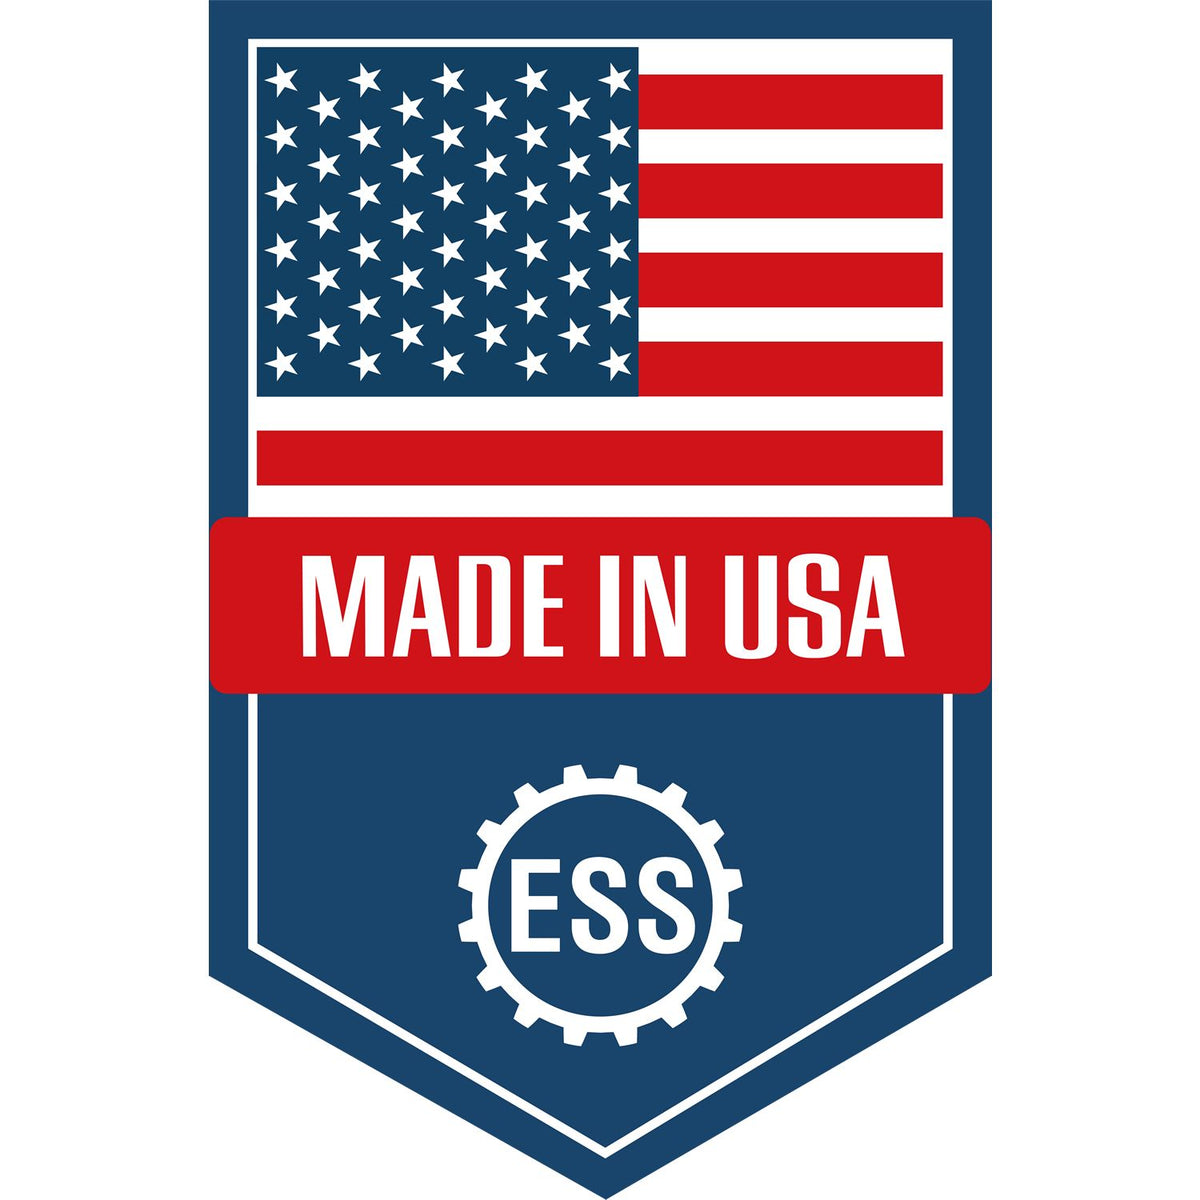 An icon or graphic with an American flag and text reading Made in USA for the Gift Texas Landscape Architect Seal